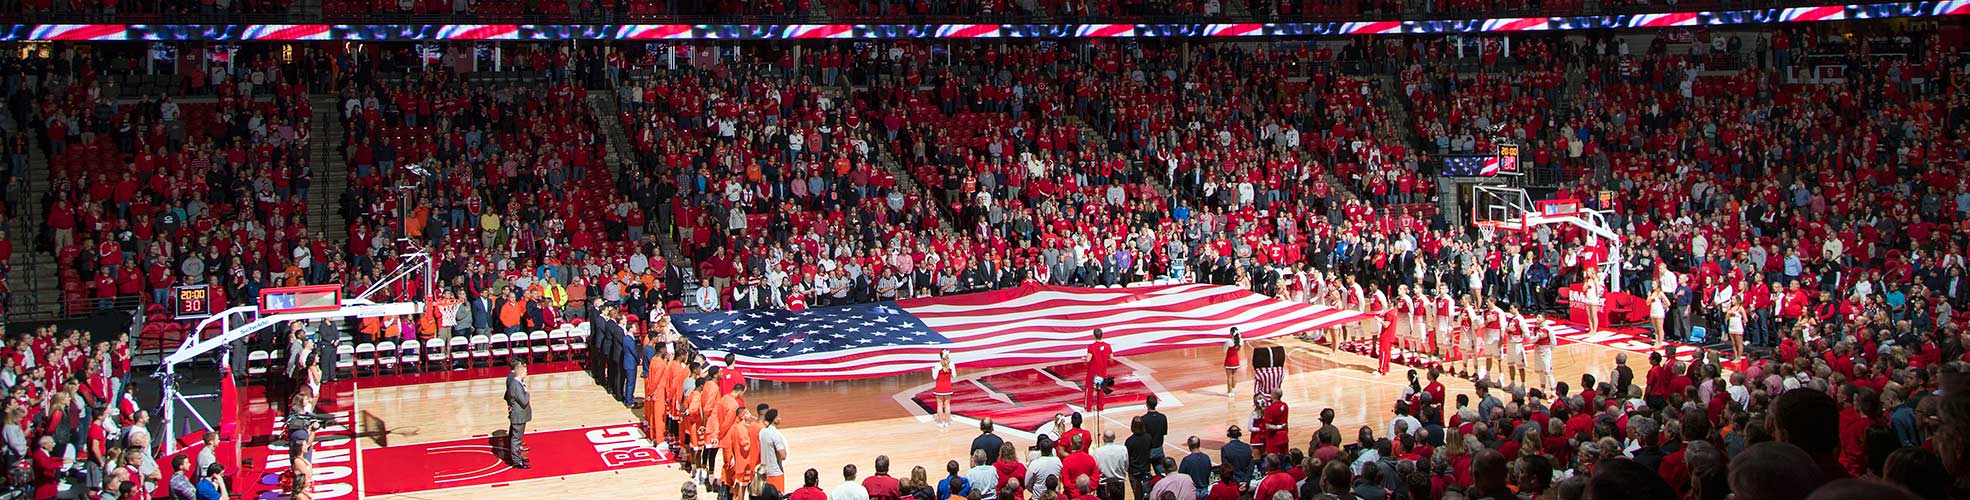 Photo of UW-Madison Basketball game at the Kohl Center during the National Anthem.